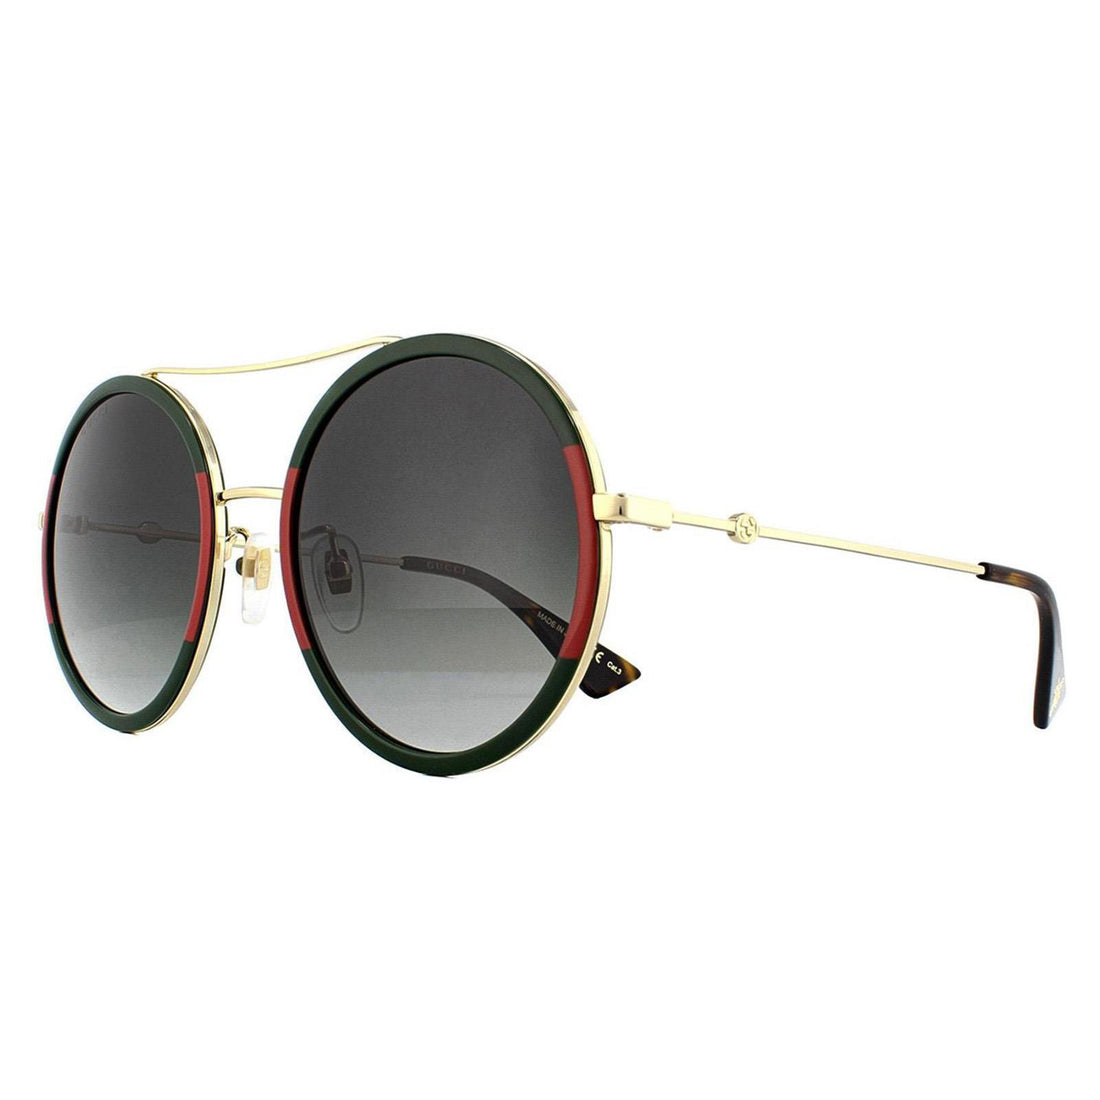 Gucci Sunglasses GG0061S 003 Gold Green and Red Green Gradient